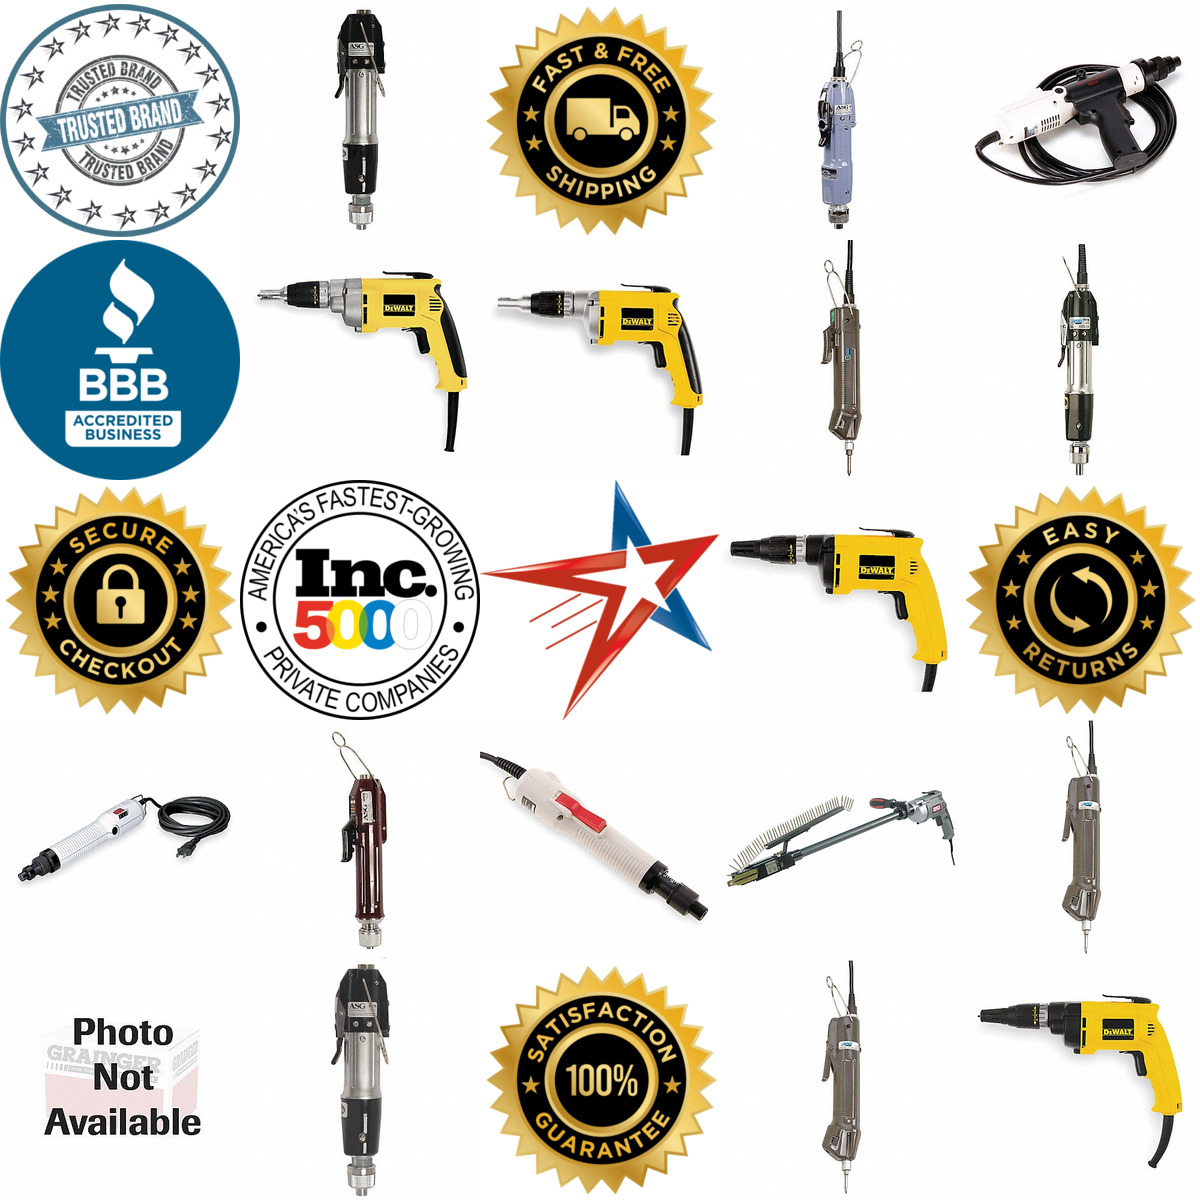 A selection of Corded Screwdrivers products on GoVets